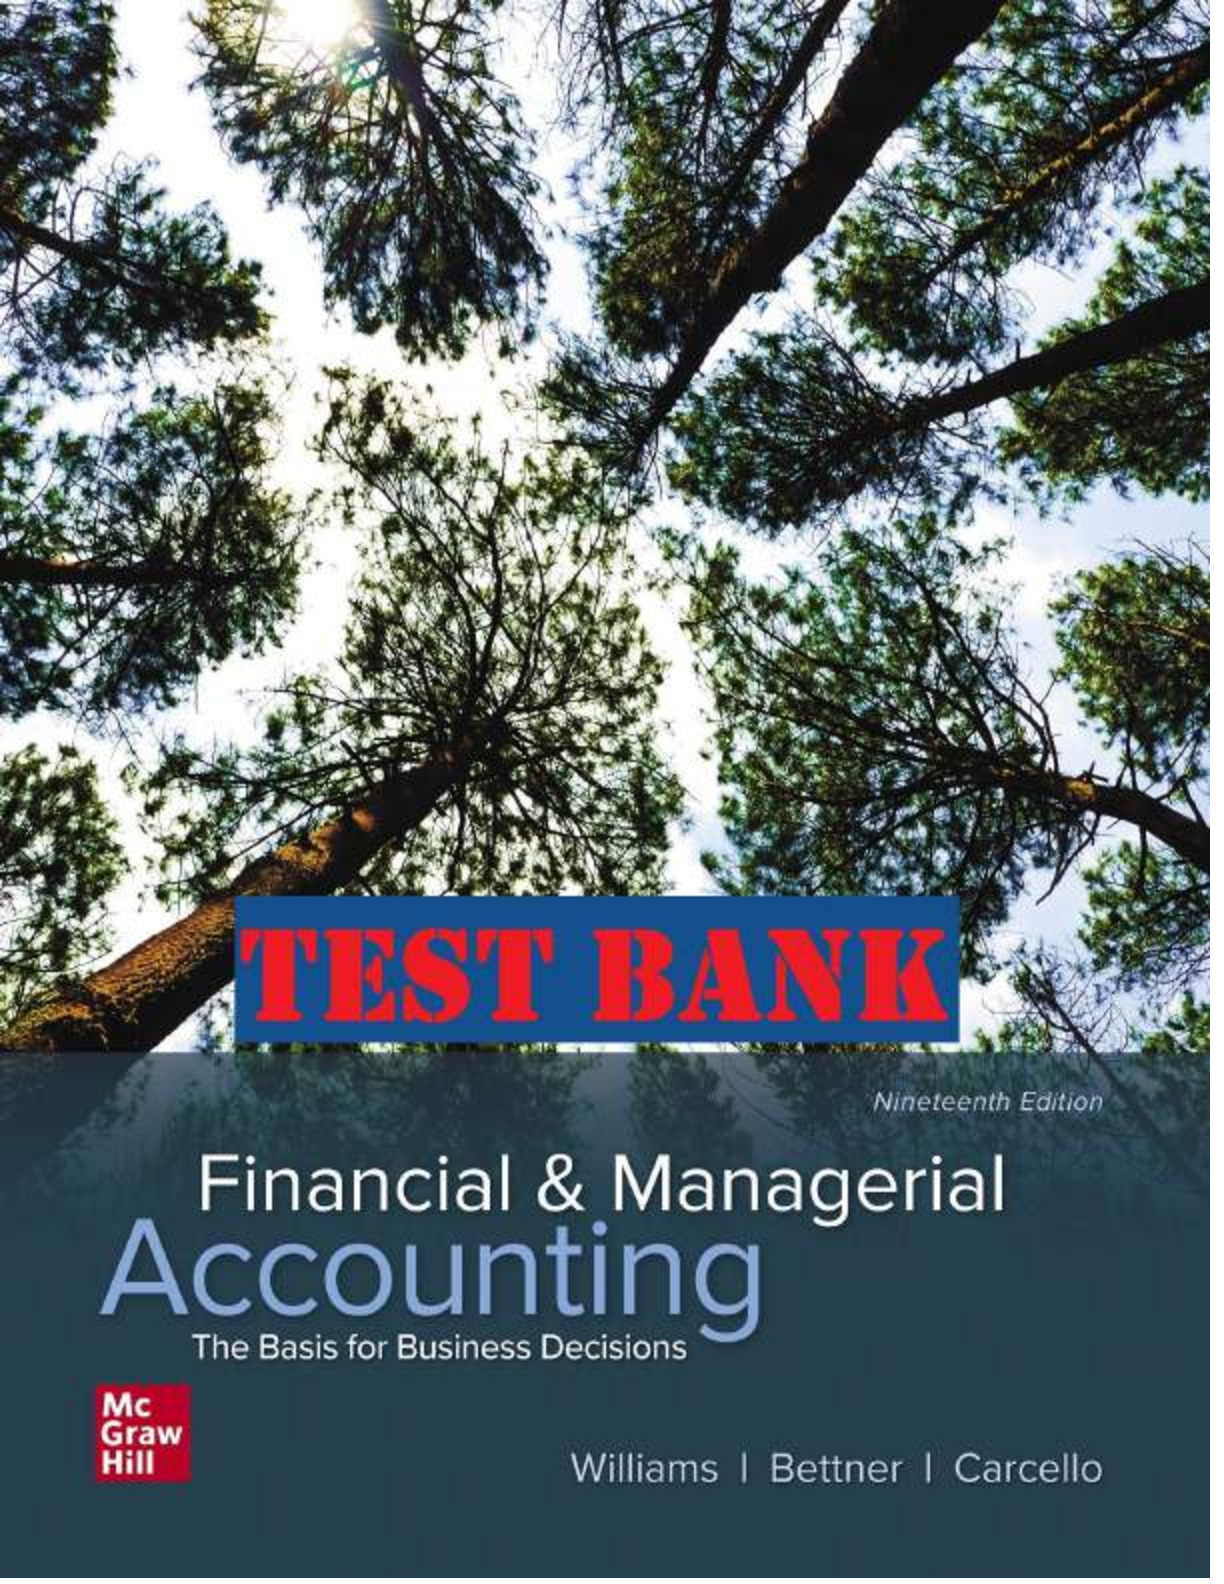 Financial and Managerial Accounting The Basis for Business Decisions, 19e R. Williams